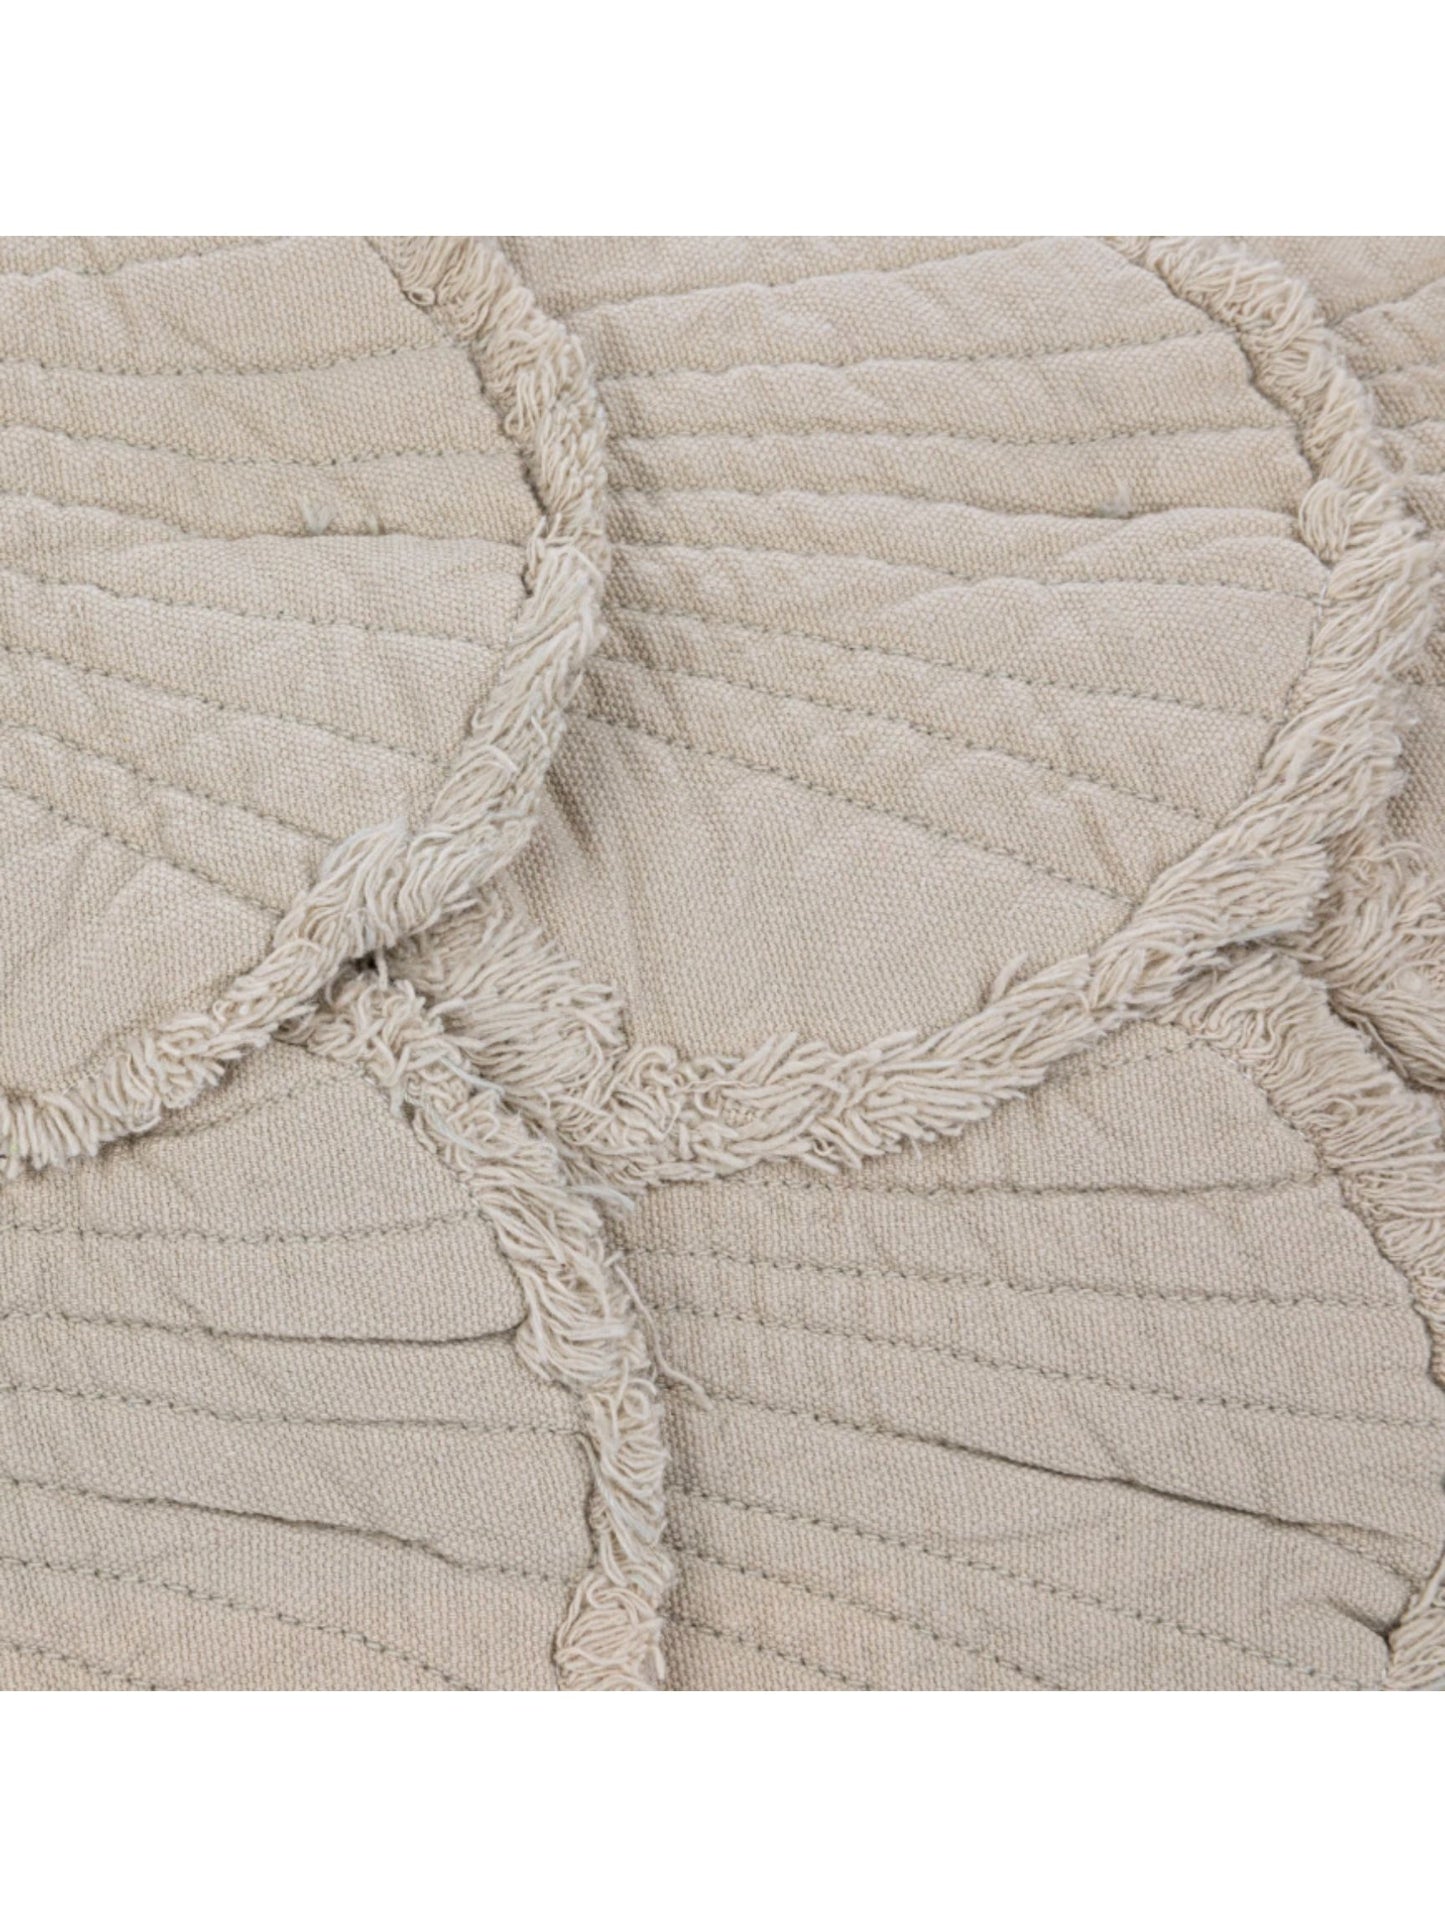 Appliqued Quilted Shells Lumbar Pillow